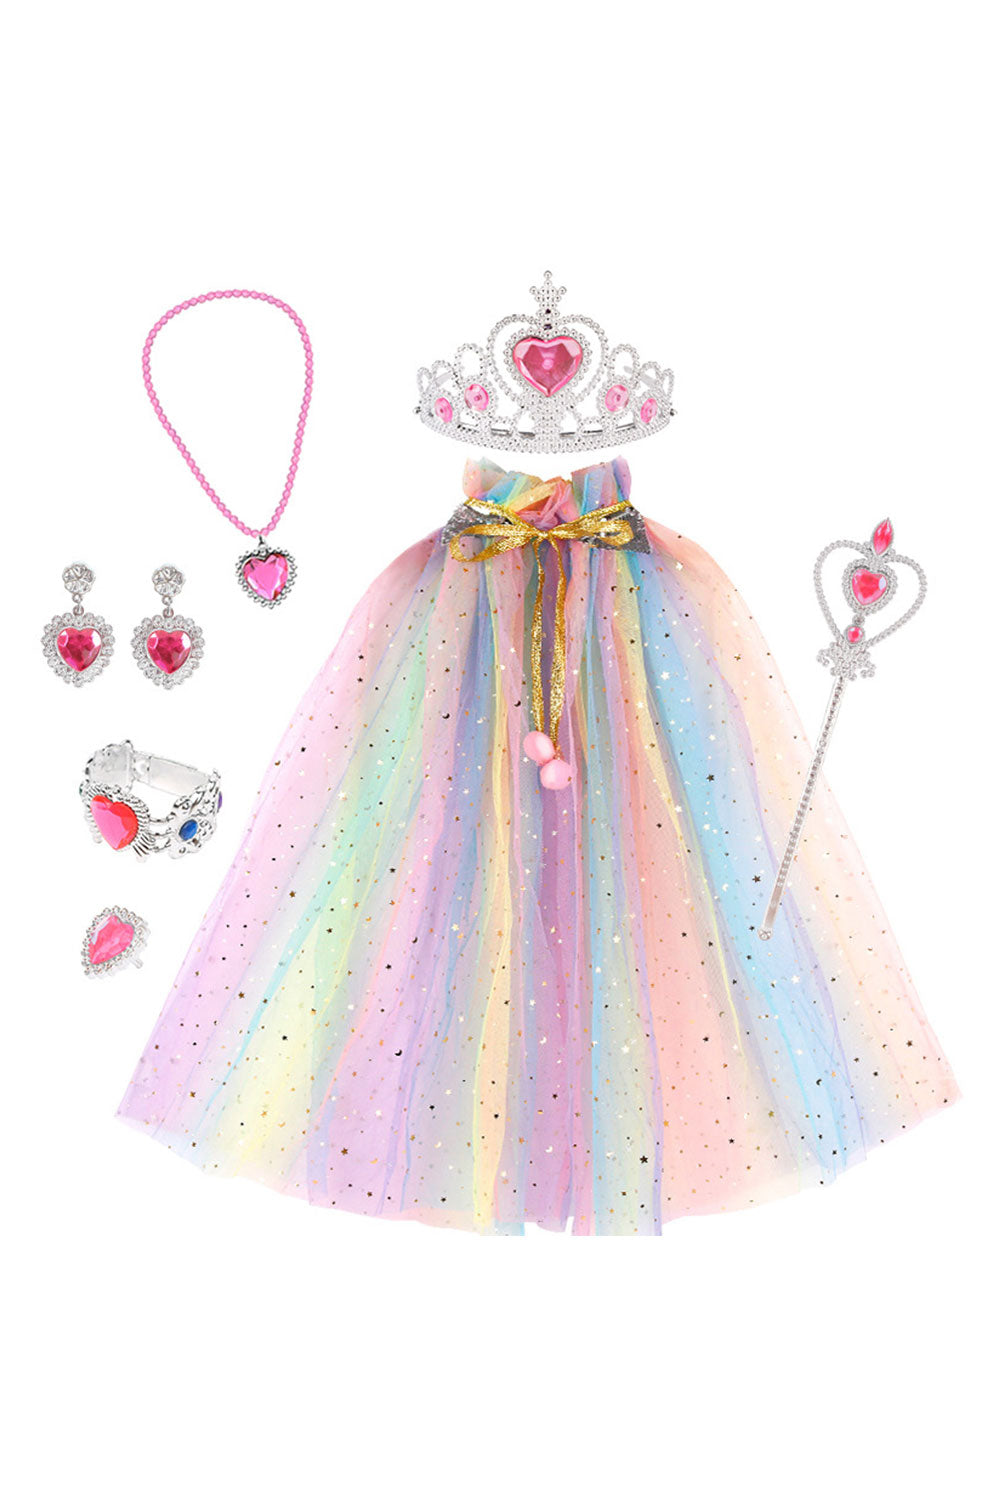 Princess Kids Girls Cosplay Cloak Crown Bag Necklace Earrings Set  Fantasia Halloween Carnival Party Disguise Costume Accessories